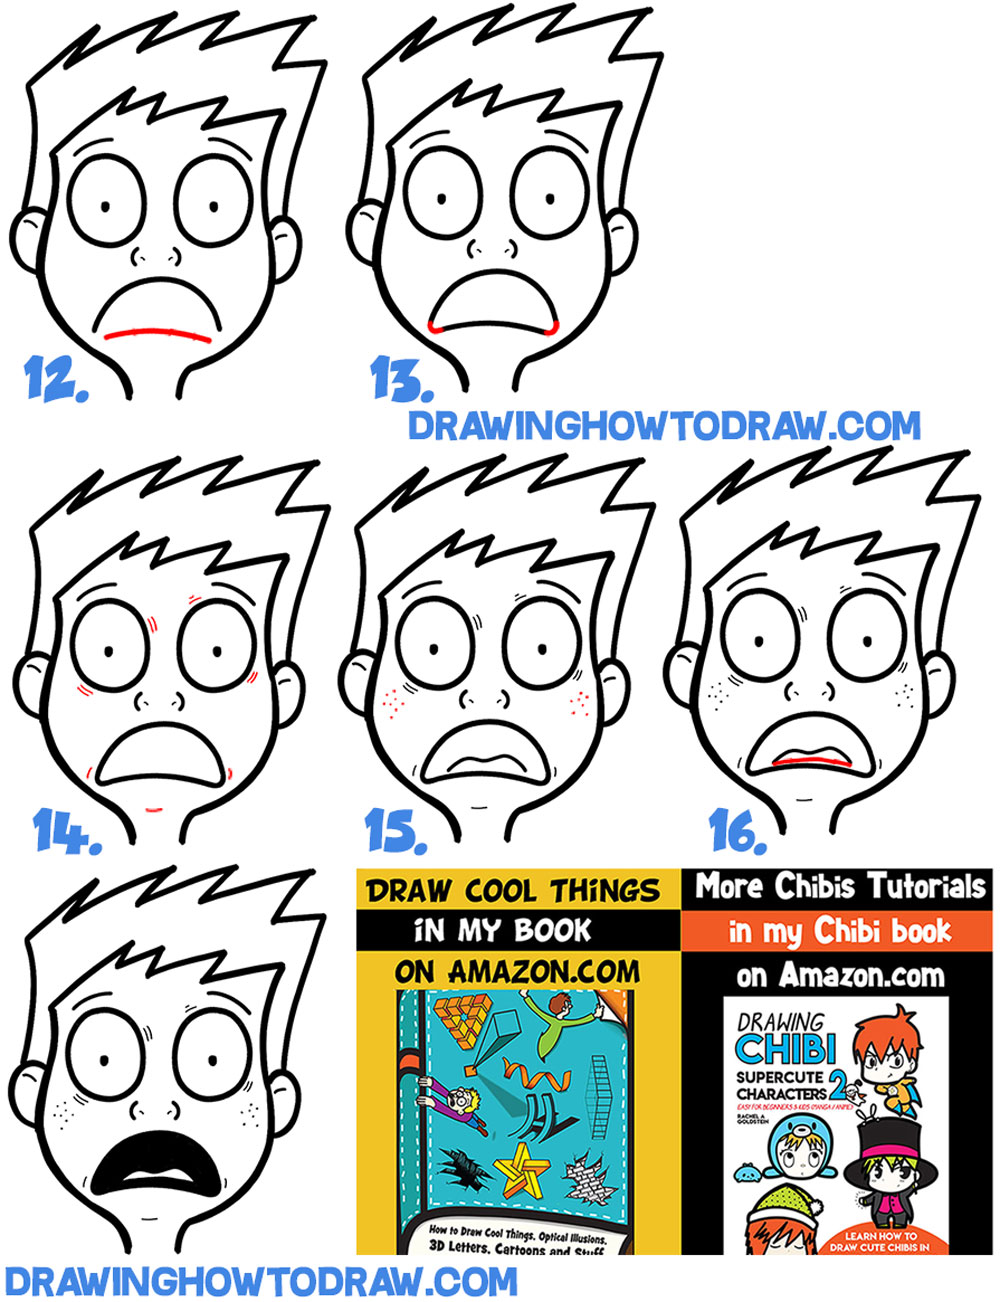 Learn How to Draw Cartoon Facial Exressions : Scared, Petrified, Afraid, Terrified, Panic (Easy Step by Step Drawing Tutorial)